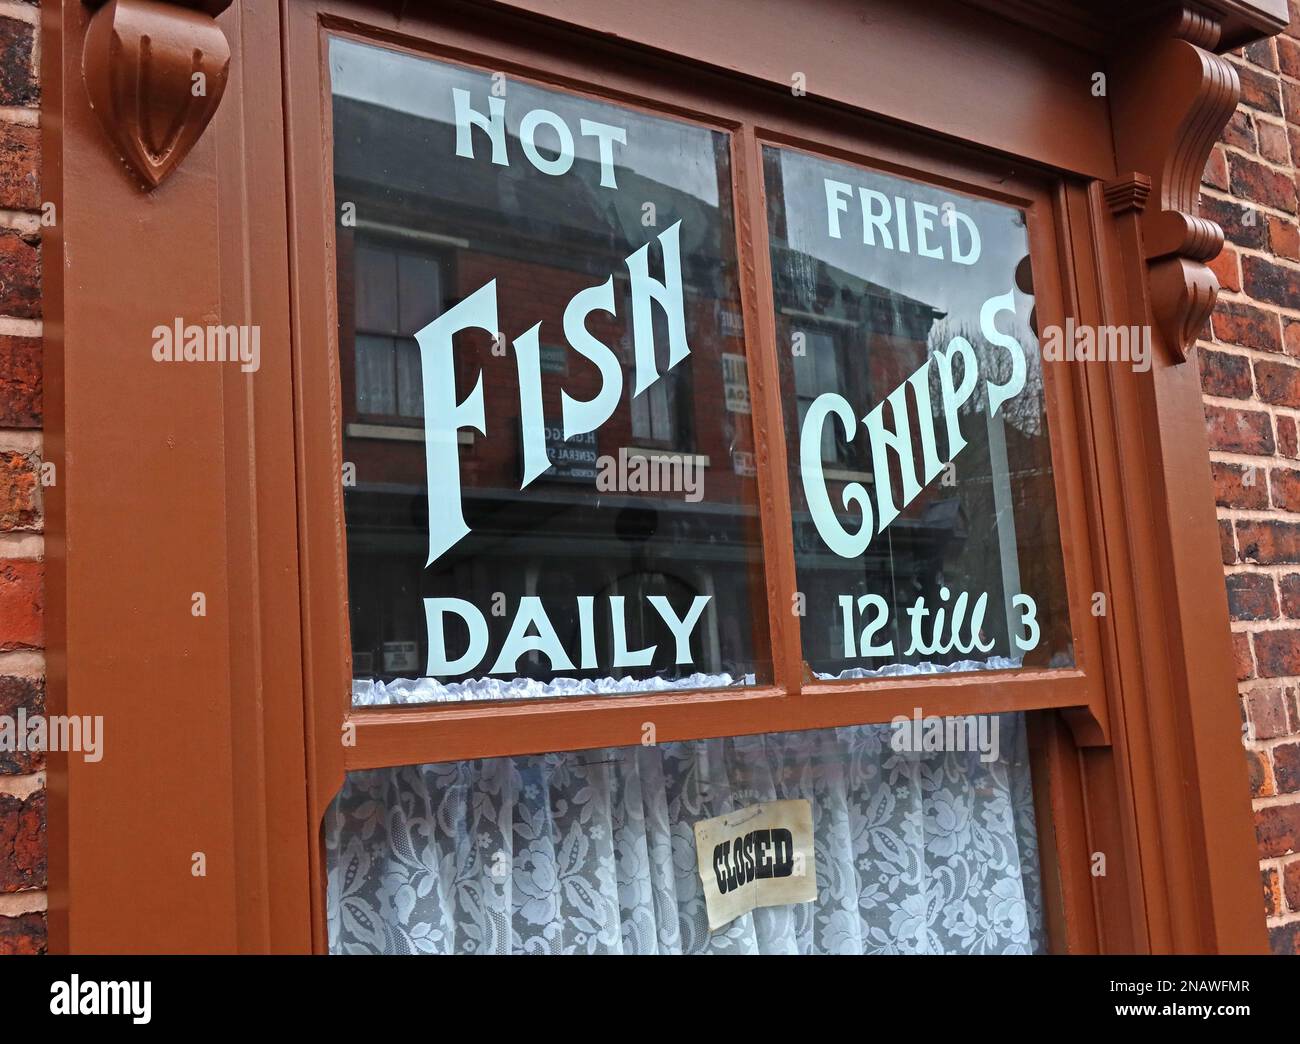 The British national dish, traditional hot fried Fish & chips daily Stock Photo